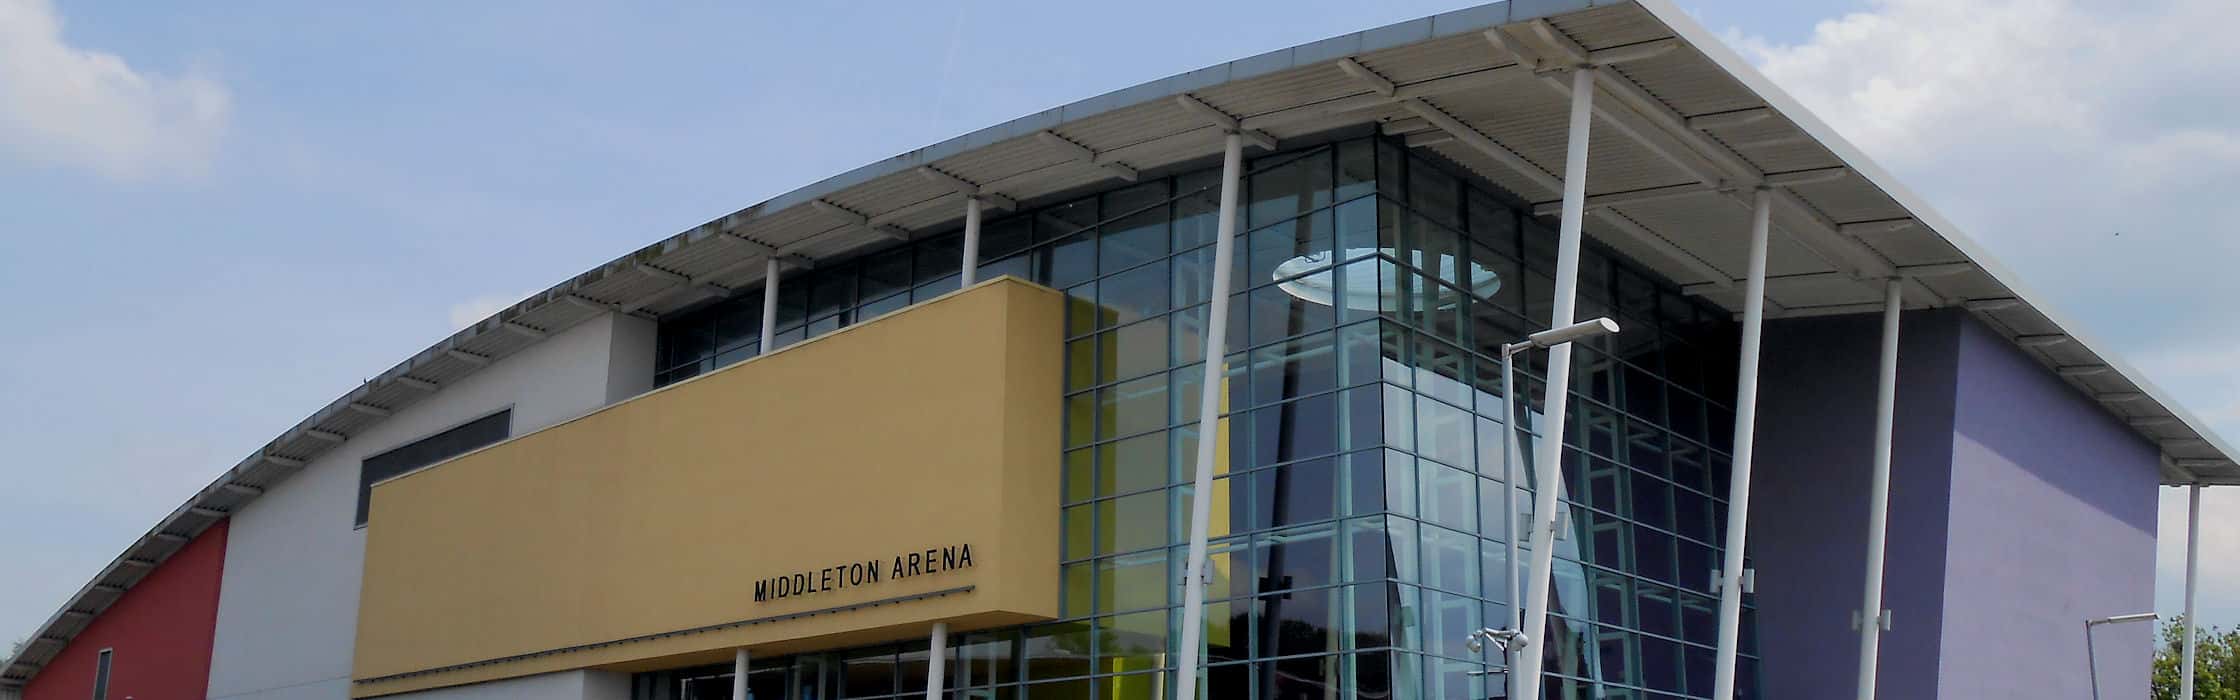 What's On at Middleton Arena, Manchester